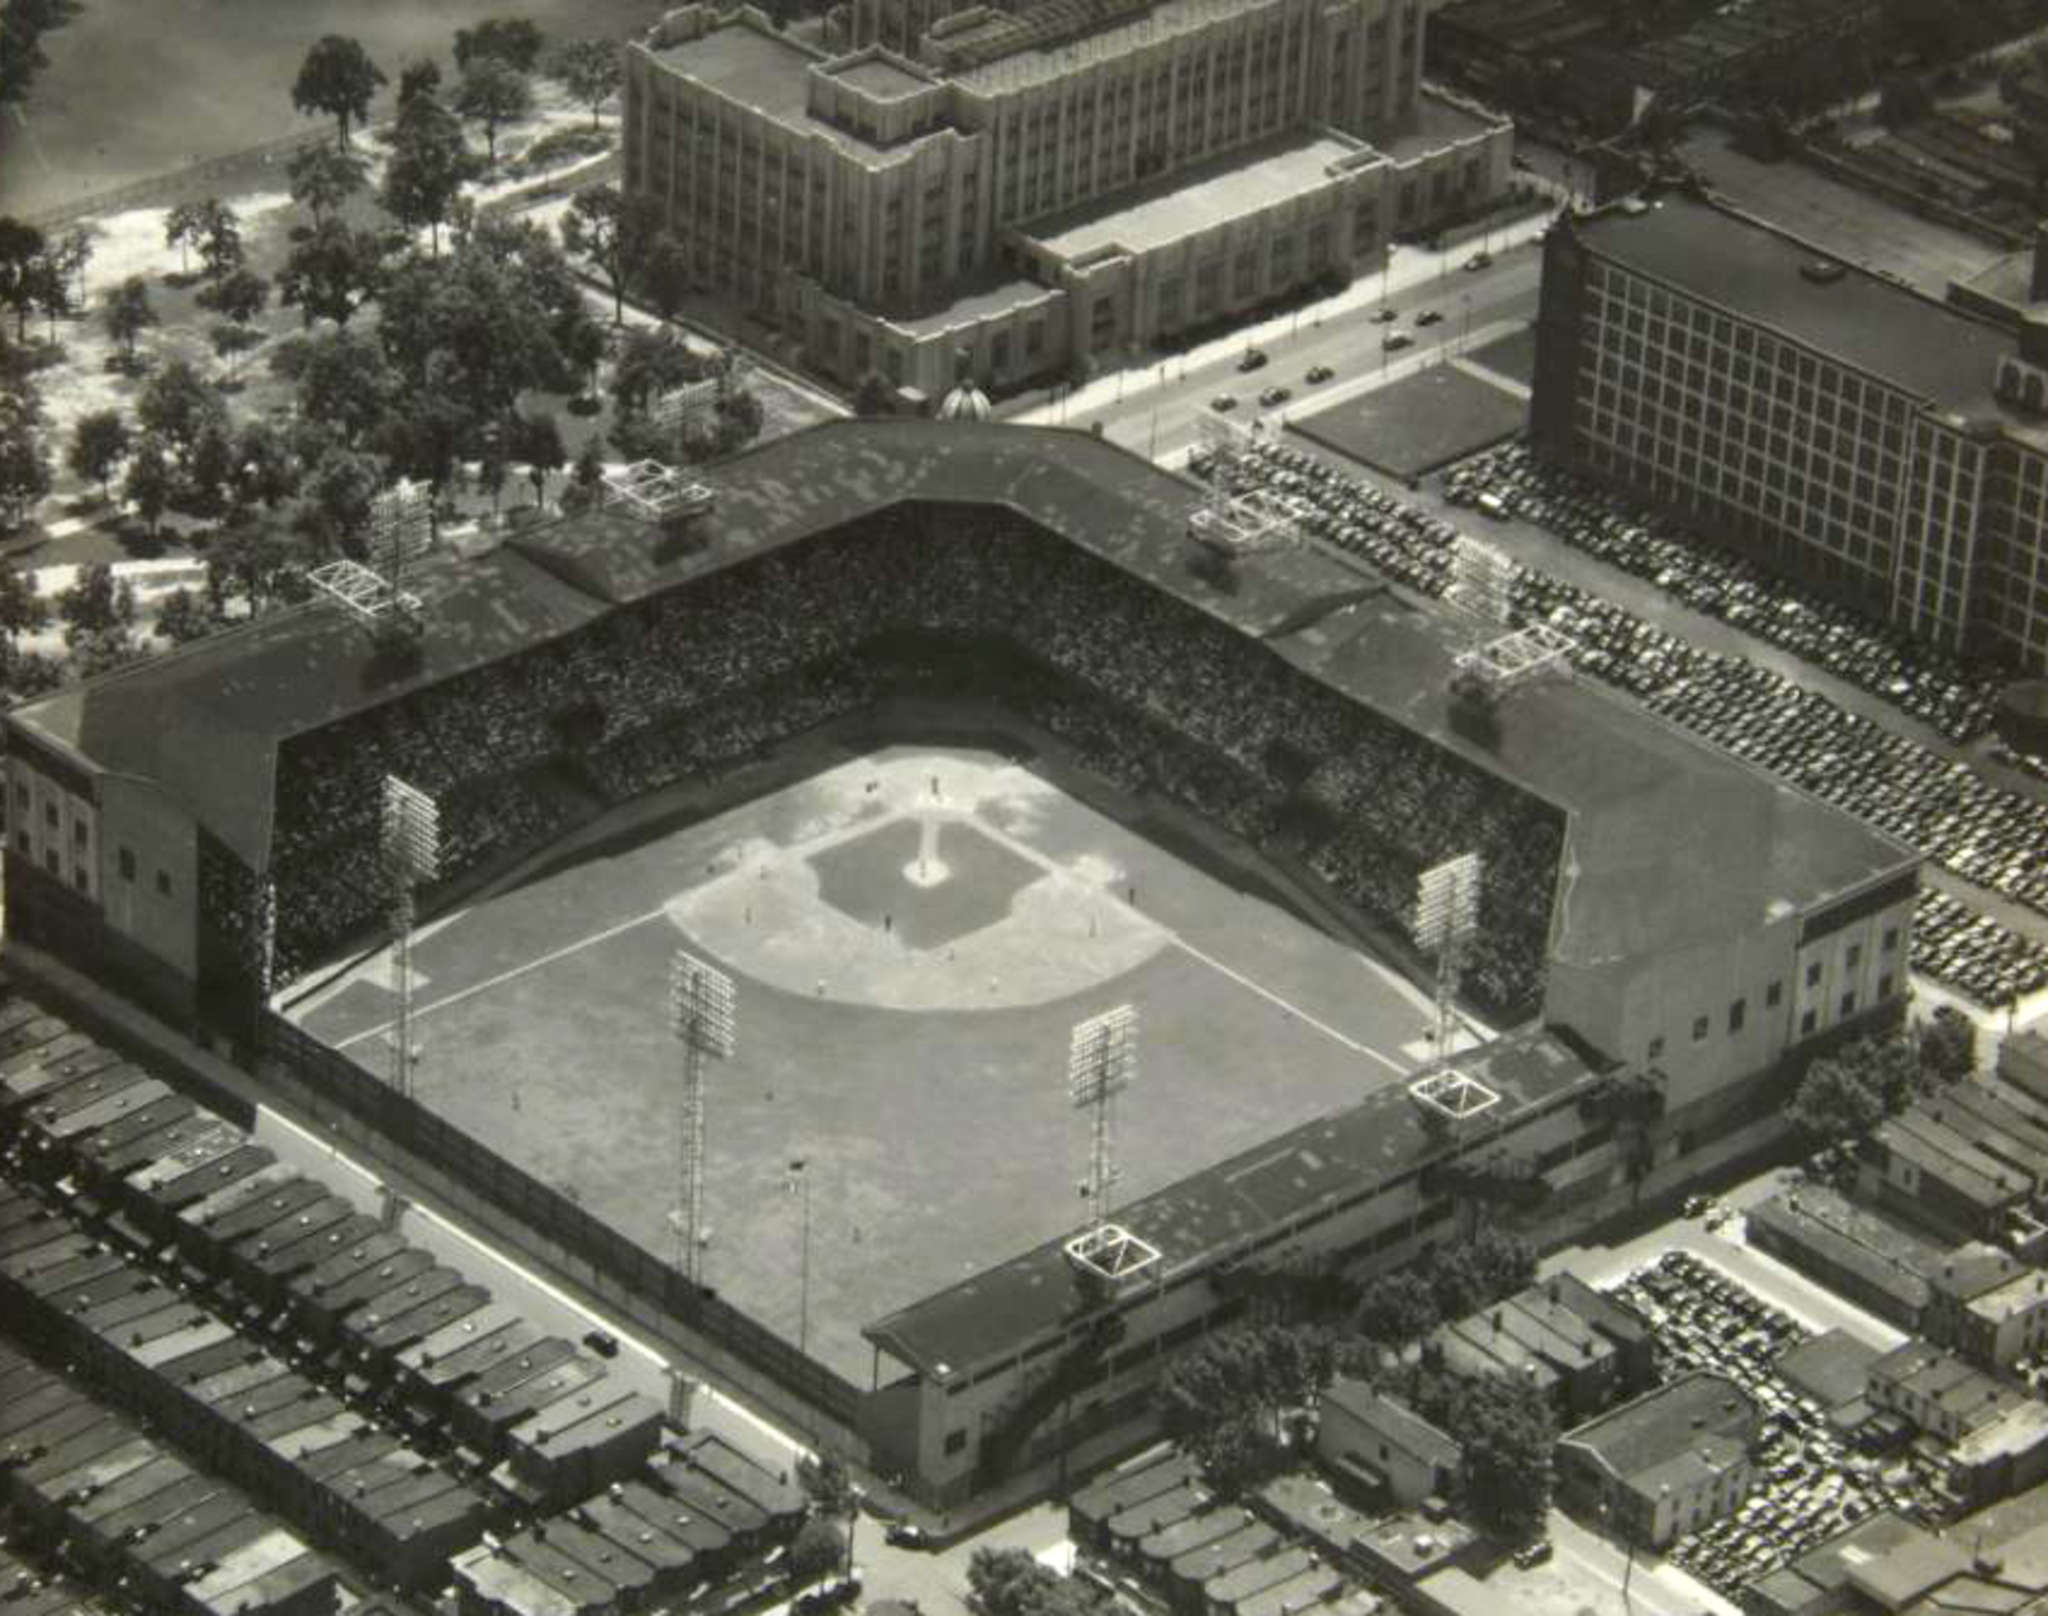 Echoes of baseball history from long-gone Shibe Park